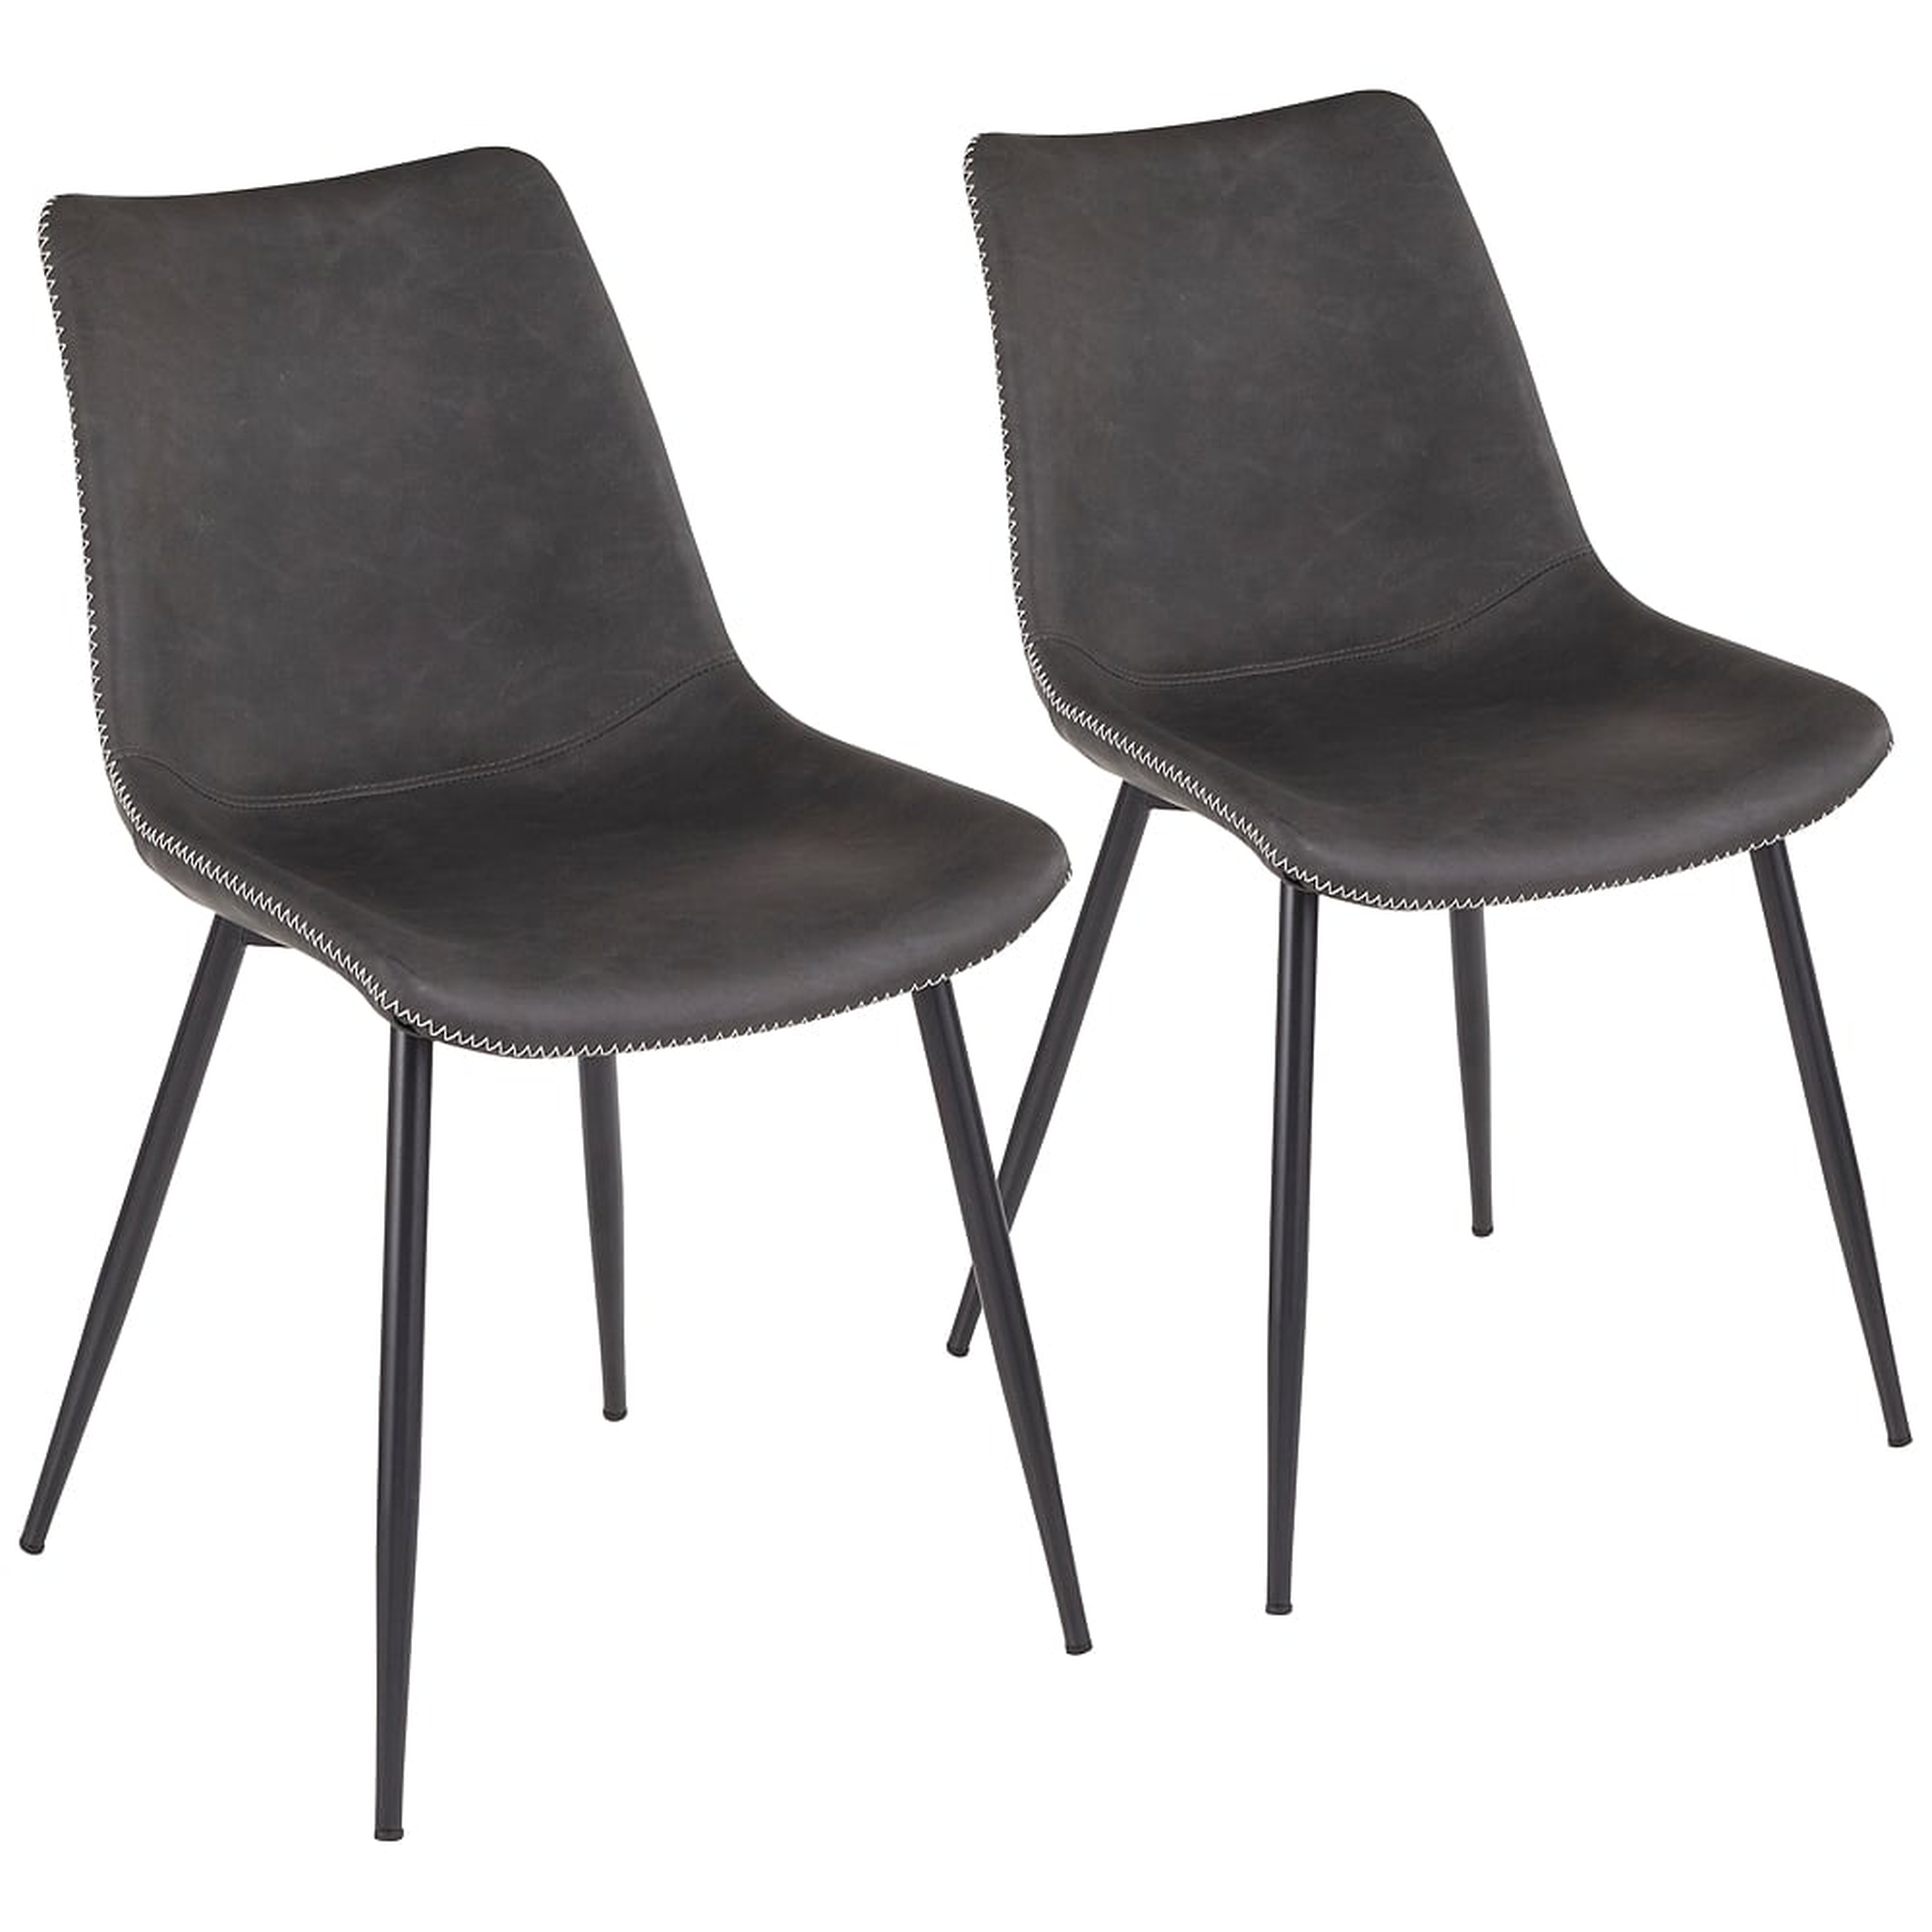 Durango Gray Faux Leather Dining Chairs Set of 2 - Style # 69V84 - Lamps Plus